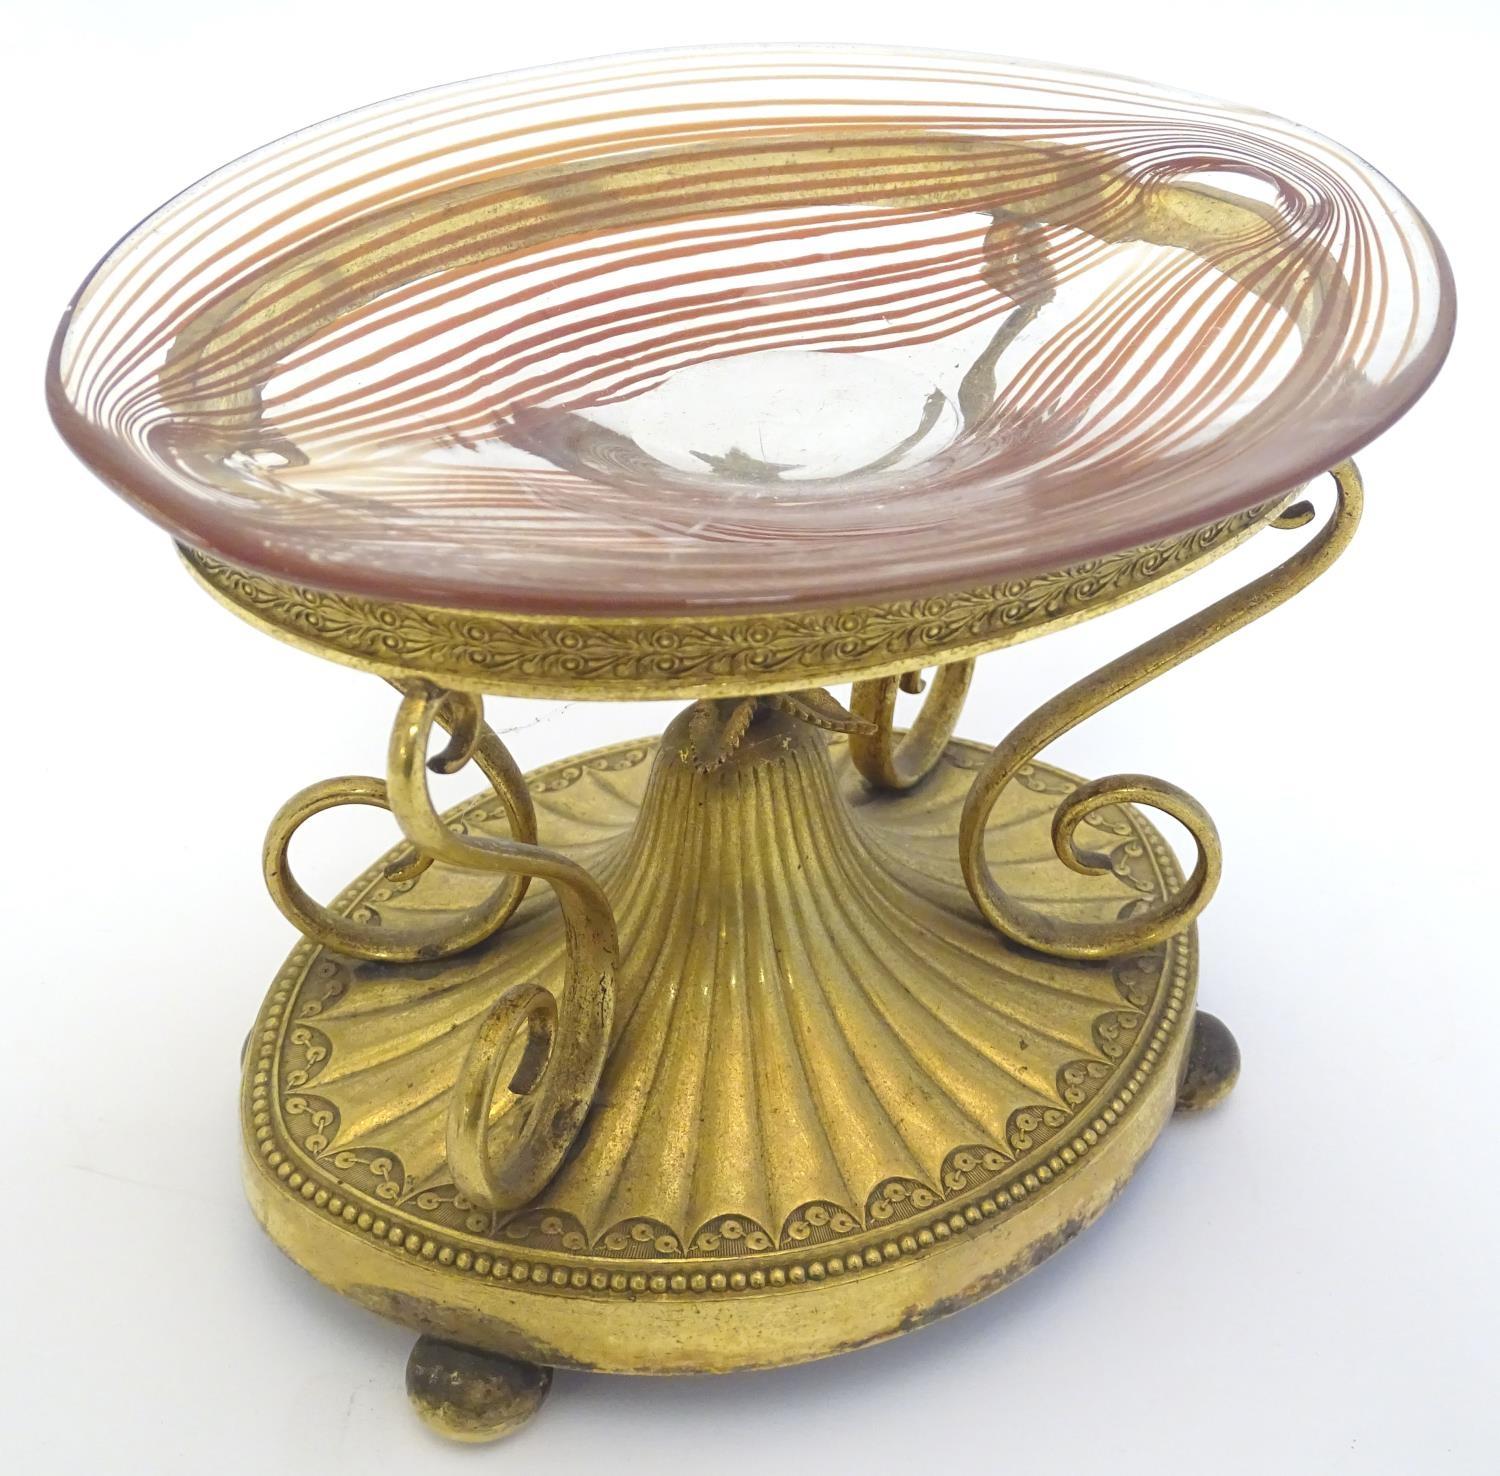 A c.1903 Elkington & Co. gilt metal oval centrepiece stand with scrolling decoration and central - Image 6 of 22